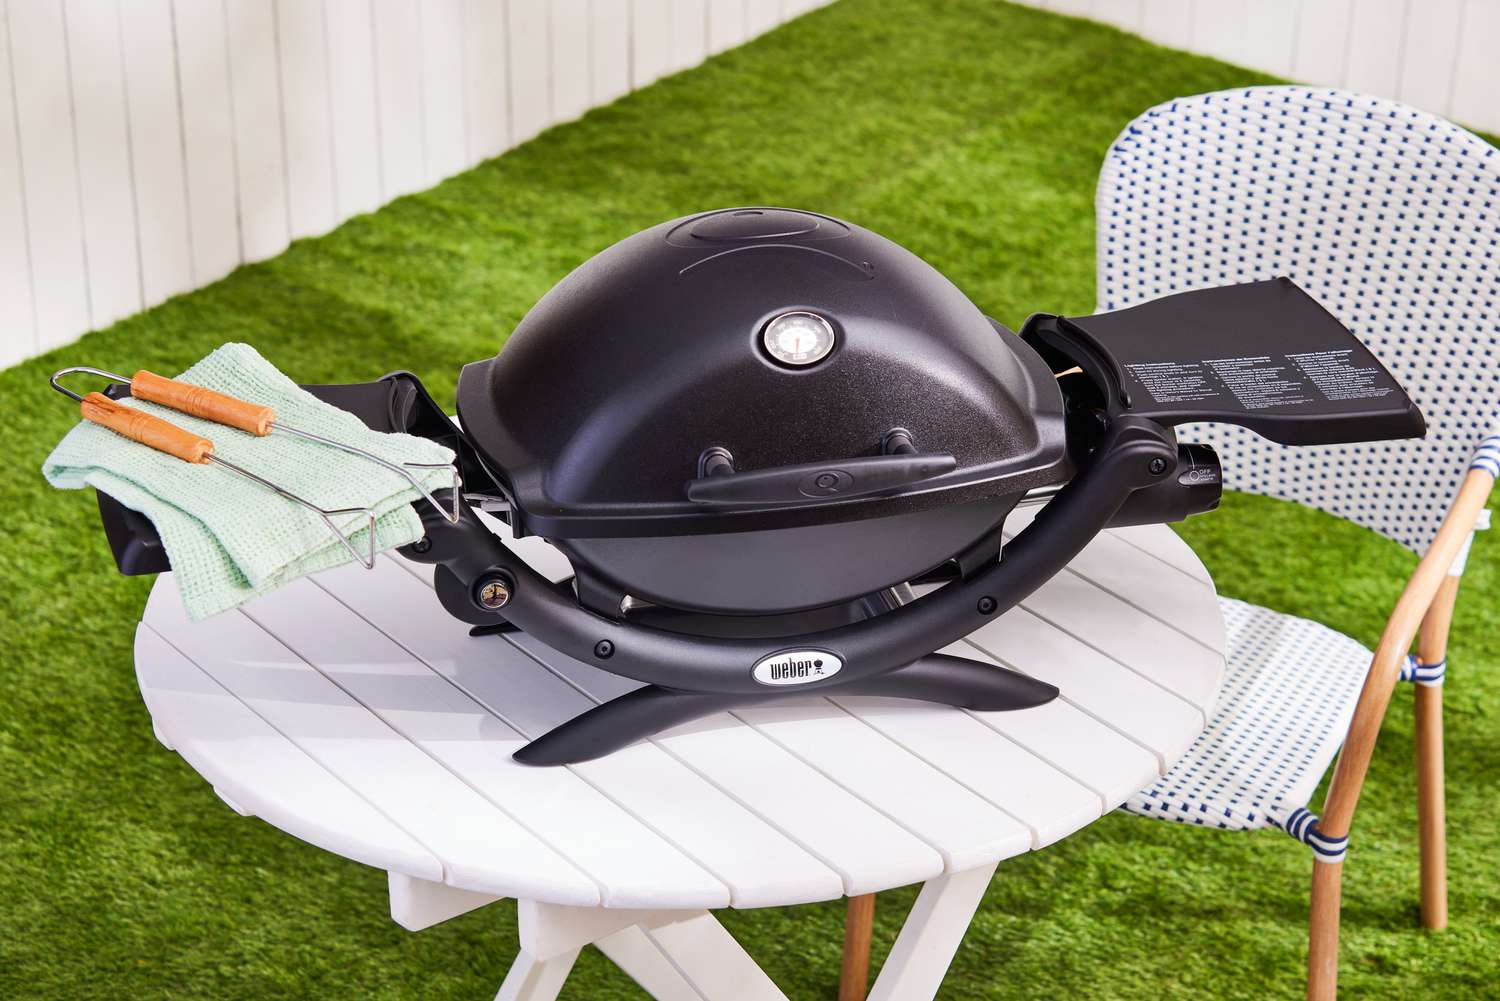 Weber Q1200 Gas Grill in a backyard table with green grass in the background